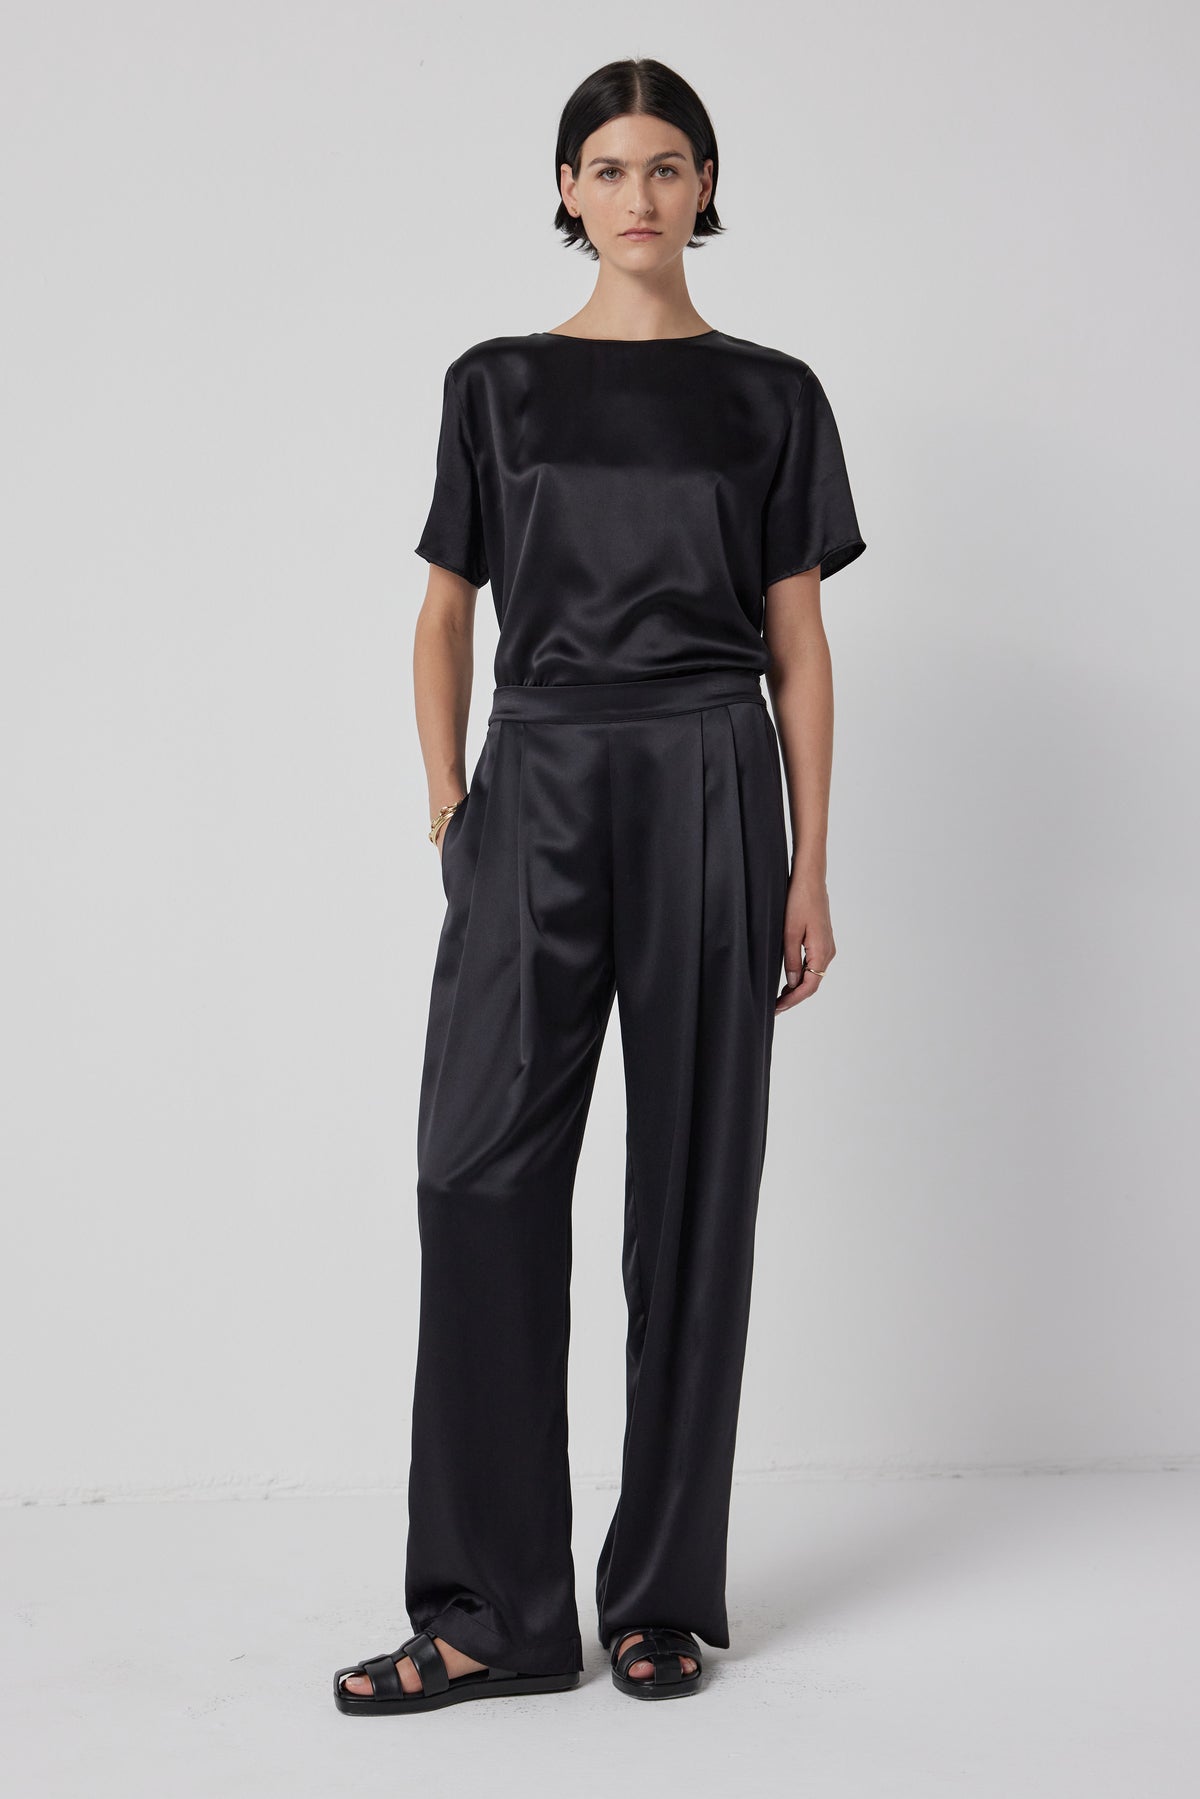 A woman modeling a black silk charmeuse Pasadena top by Velvet by Jenny Graham with matching trousers, exuding timeless elegance against a plain background.-36463793766593